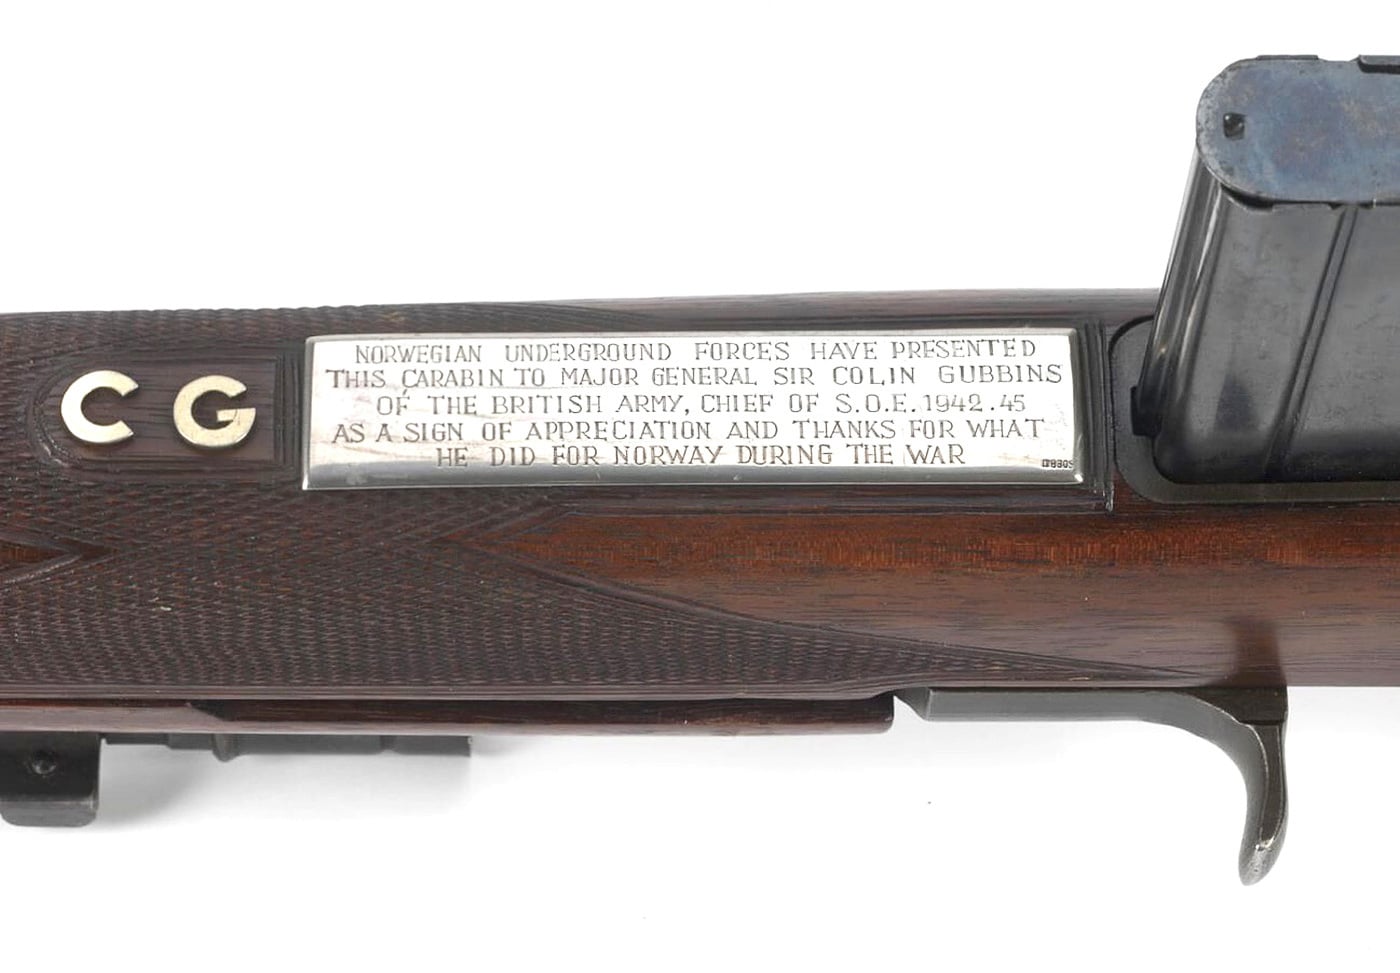 presentation plaque on m1 carbine with zf-41 scope